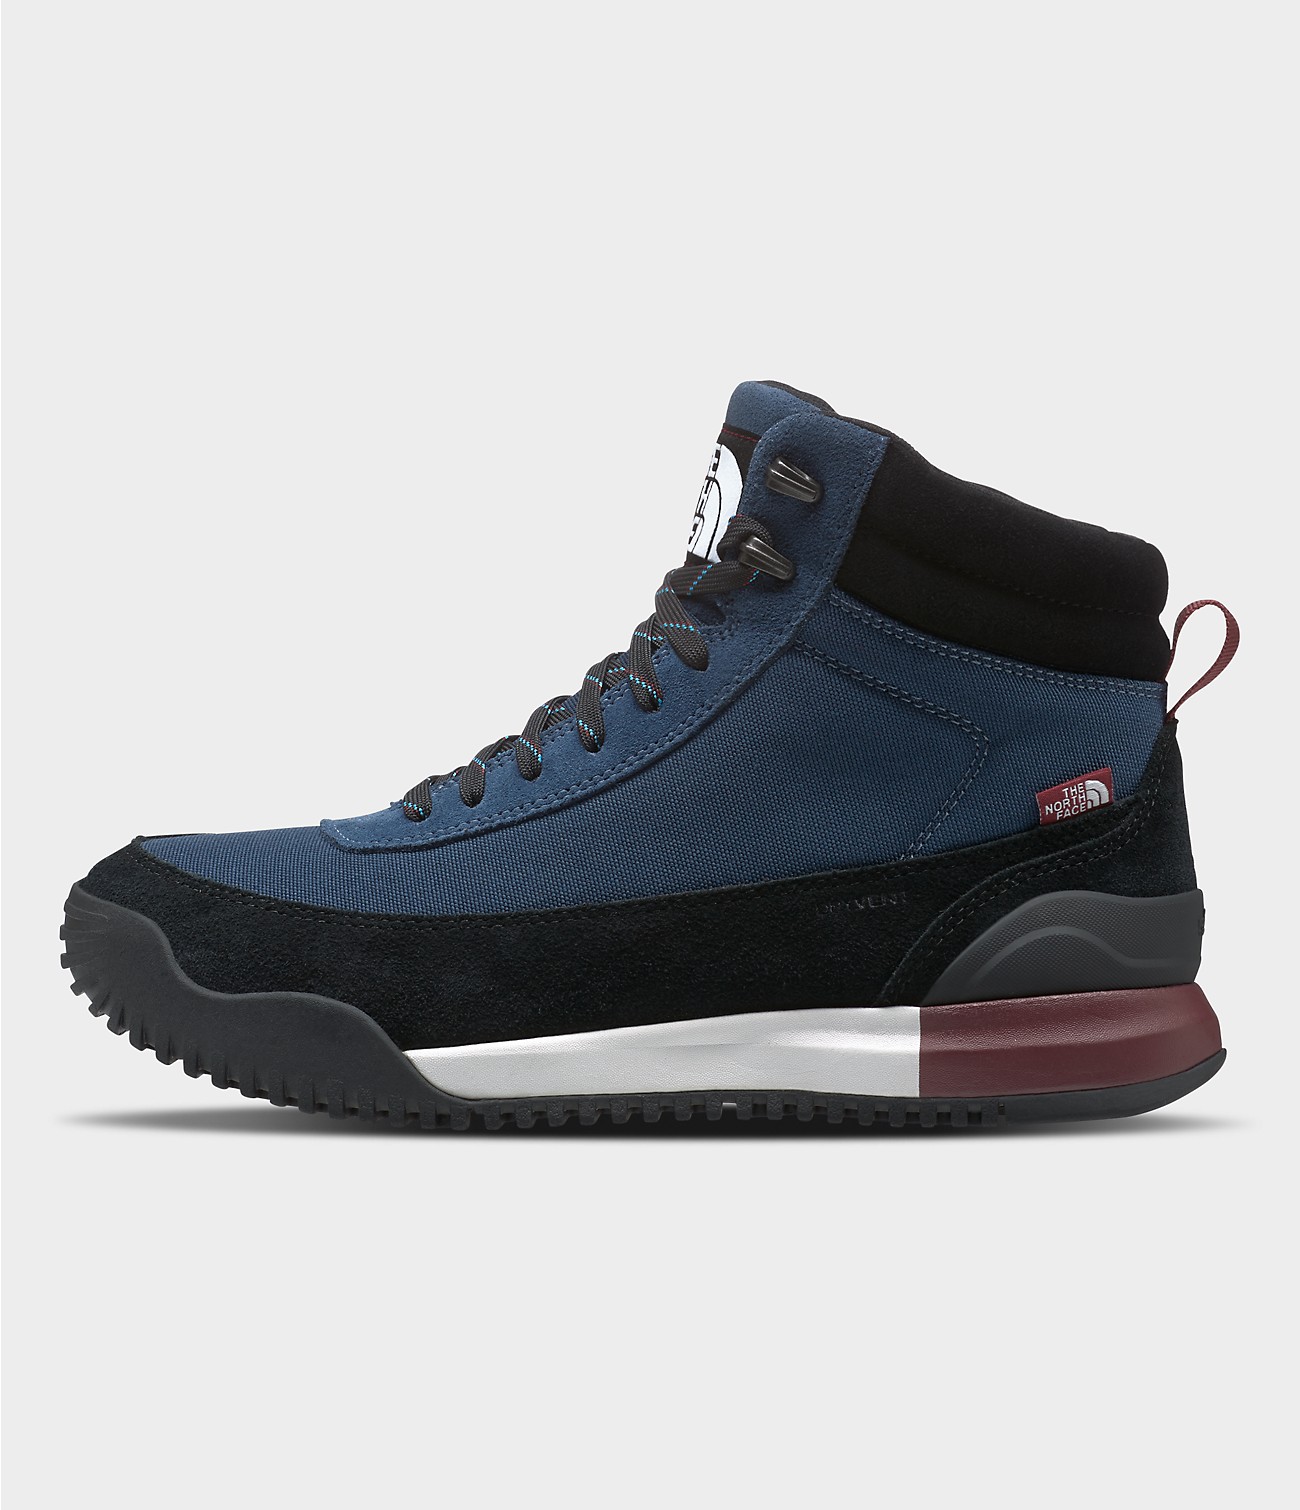 Men’s Back-To-Berkeley III Textile Waterproof Boots | The North Face